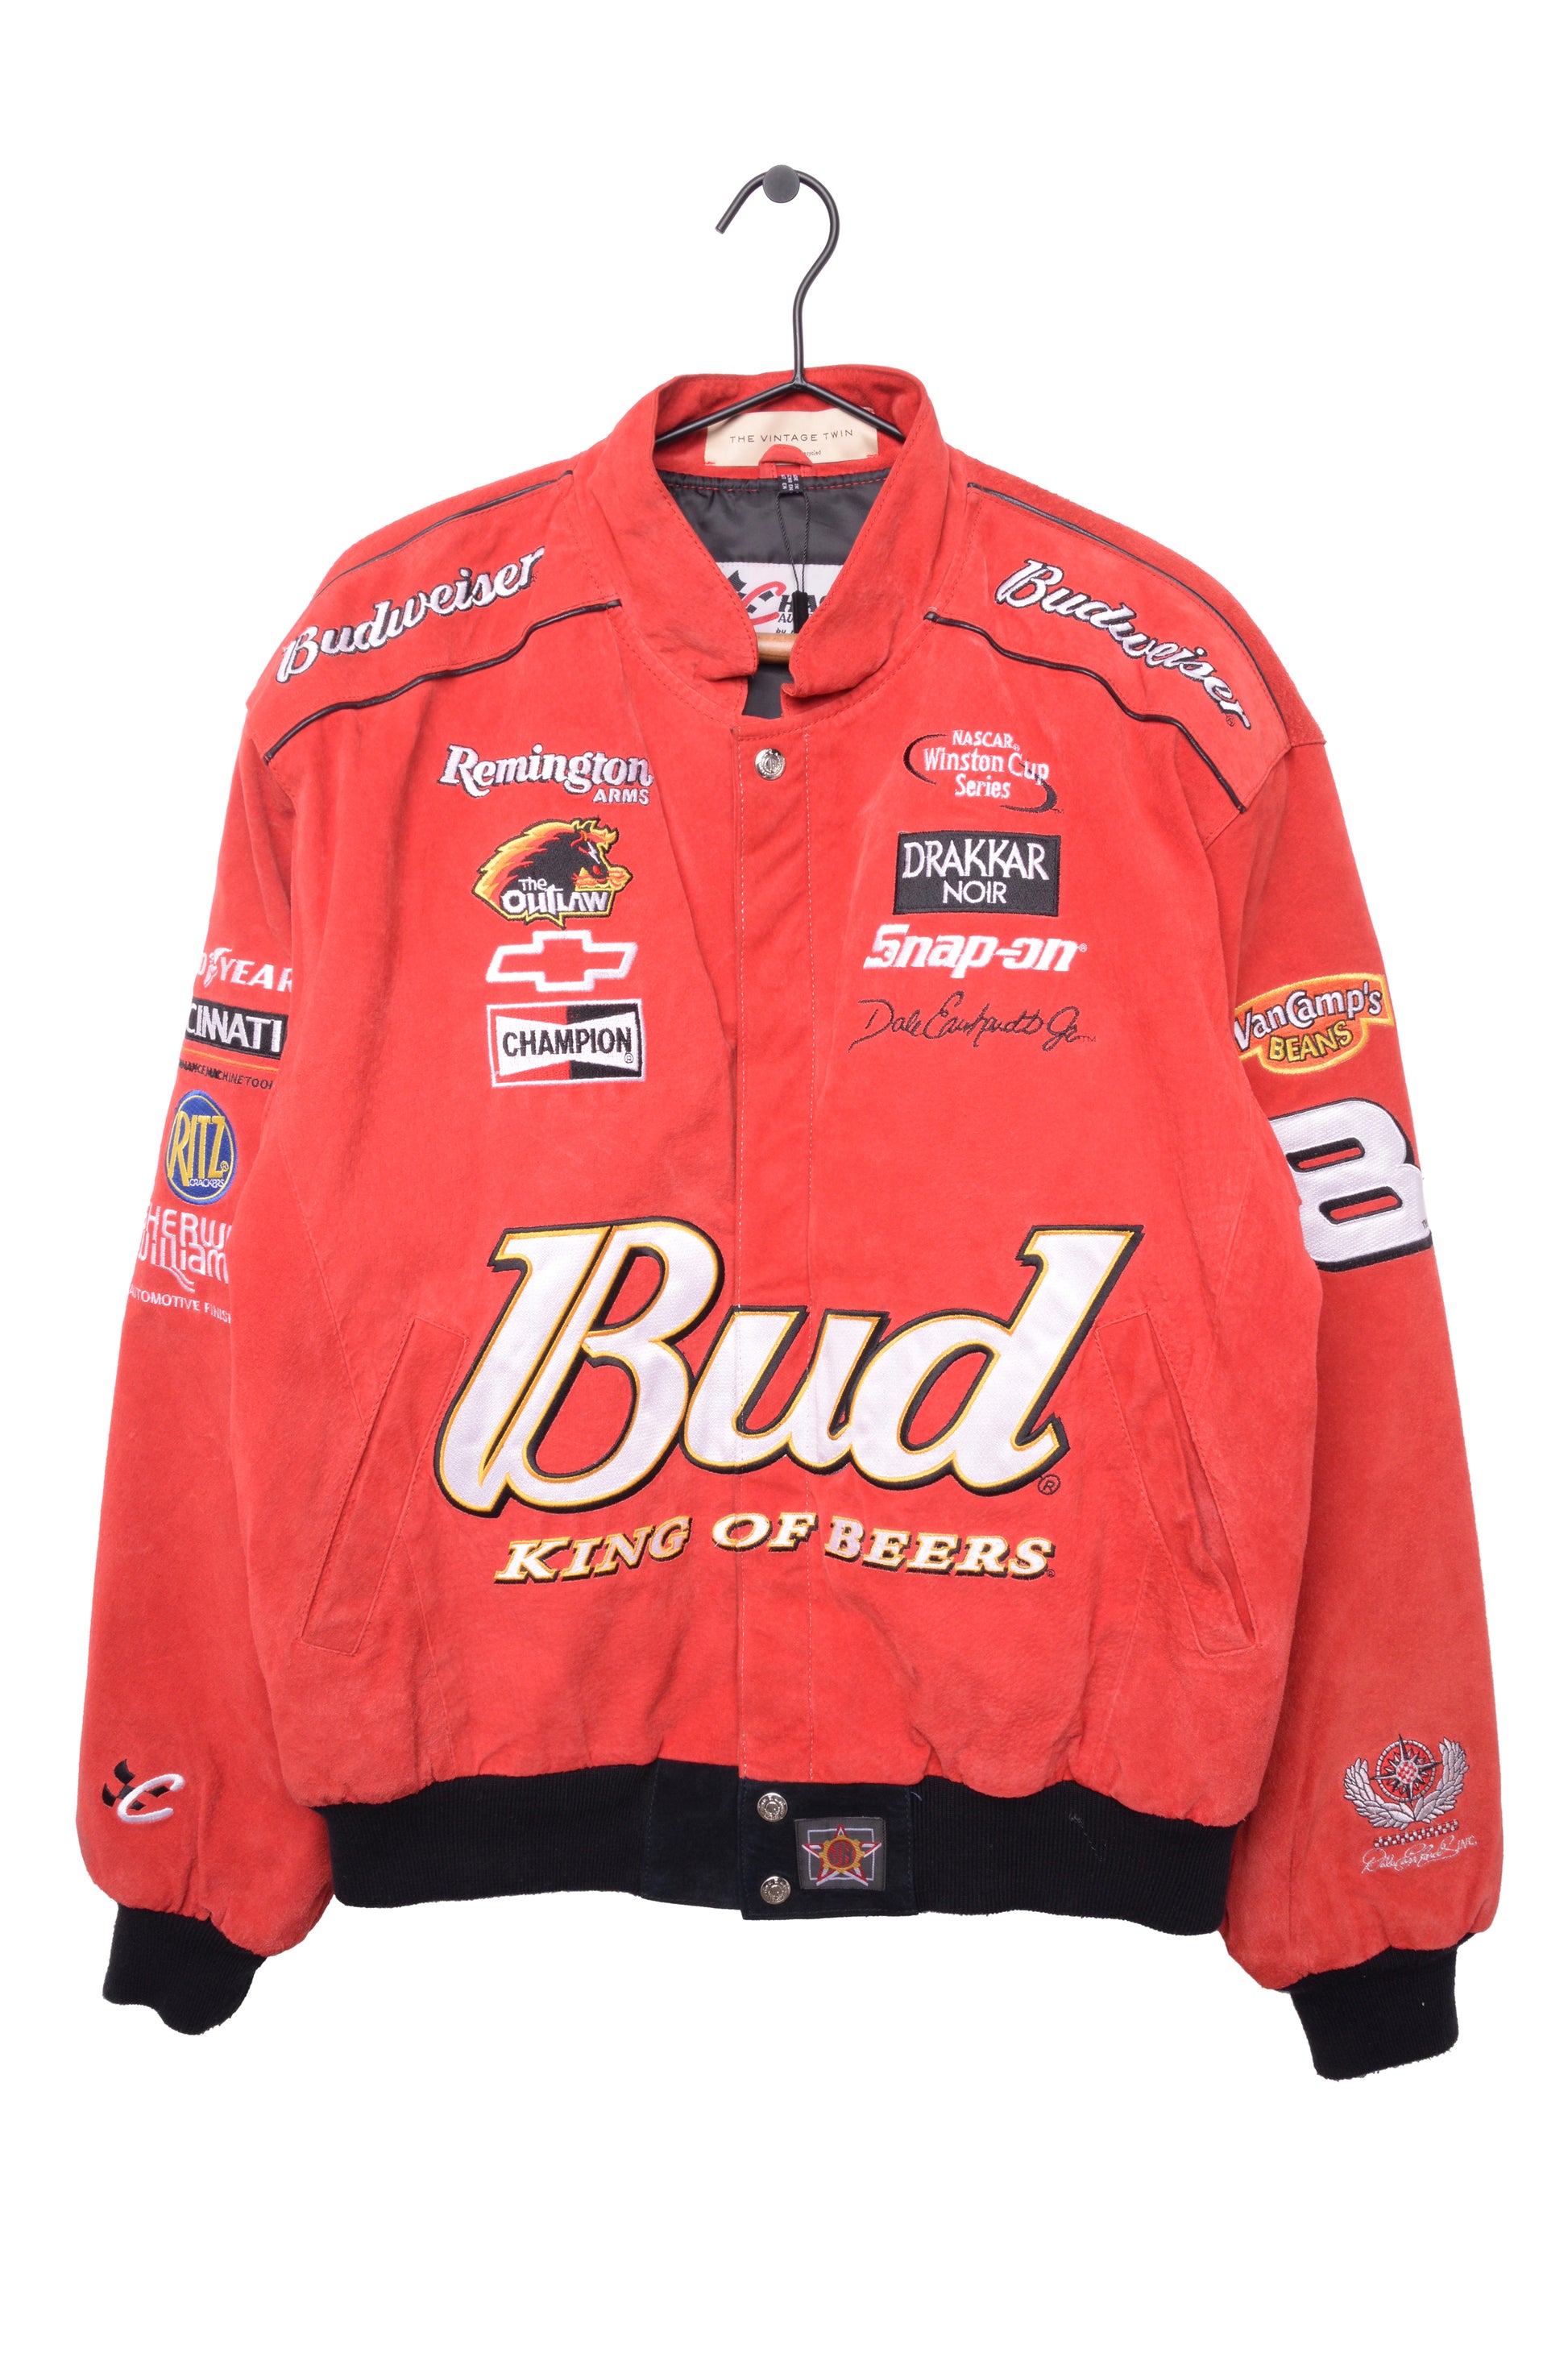 Budweiser Dale Earnhardt Jr. Racing Jacket Free Shipping - The Vintage Twin